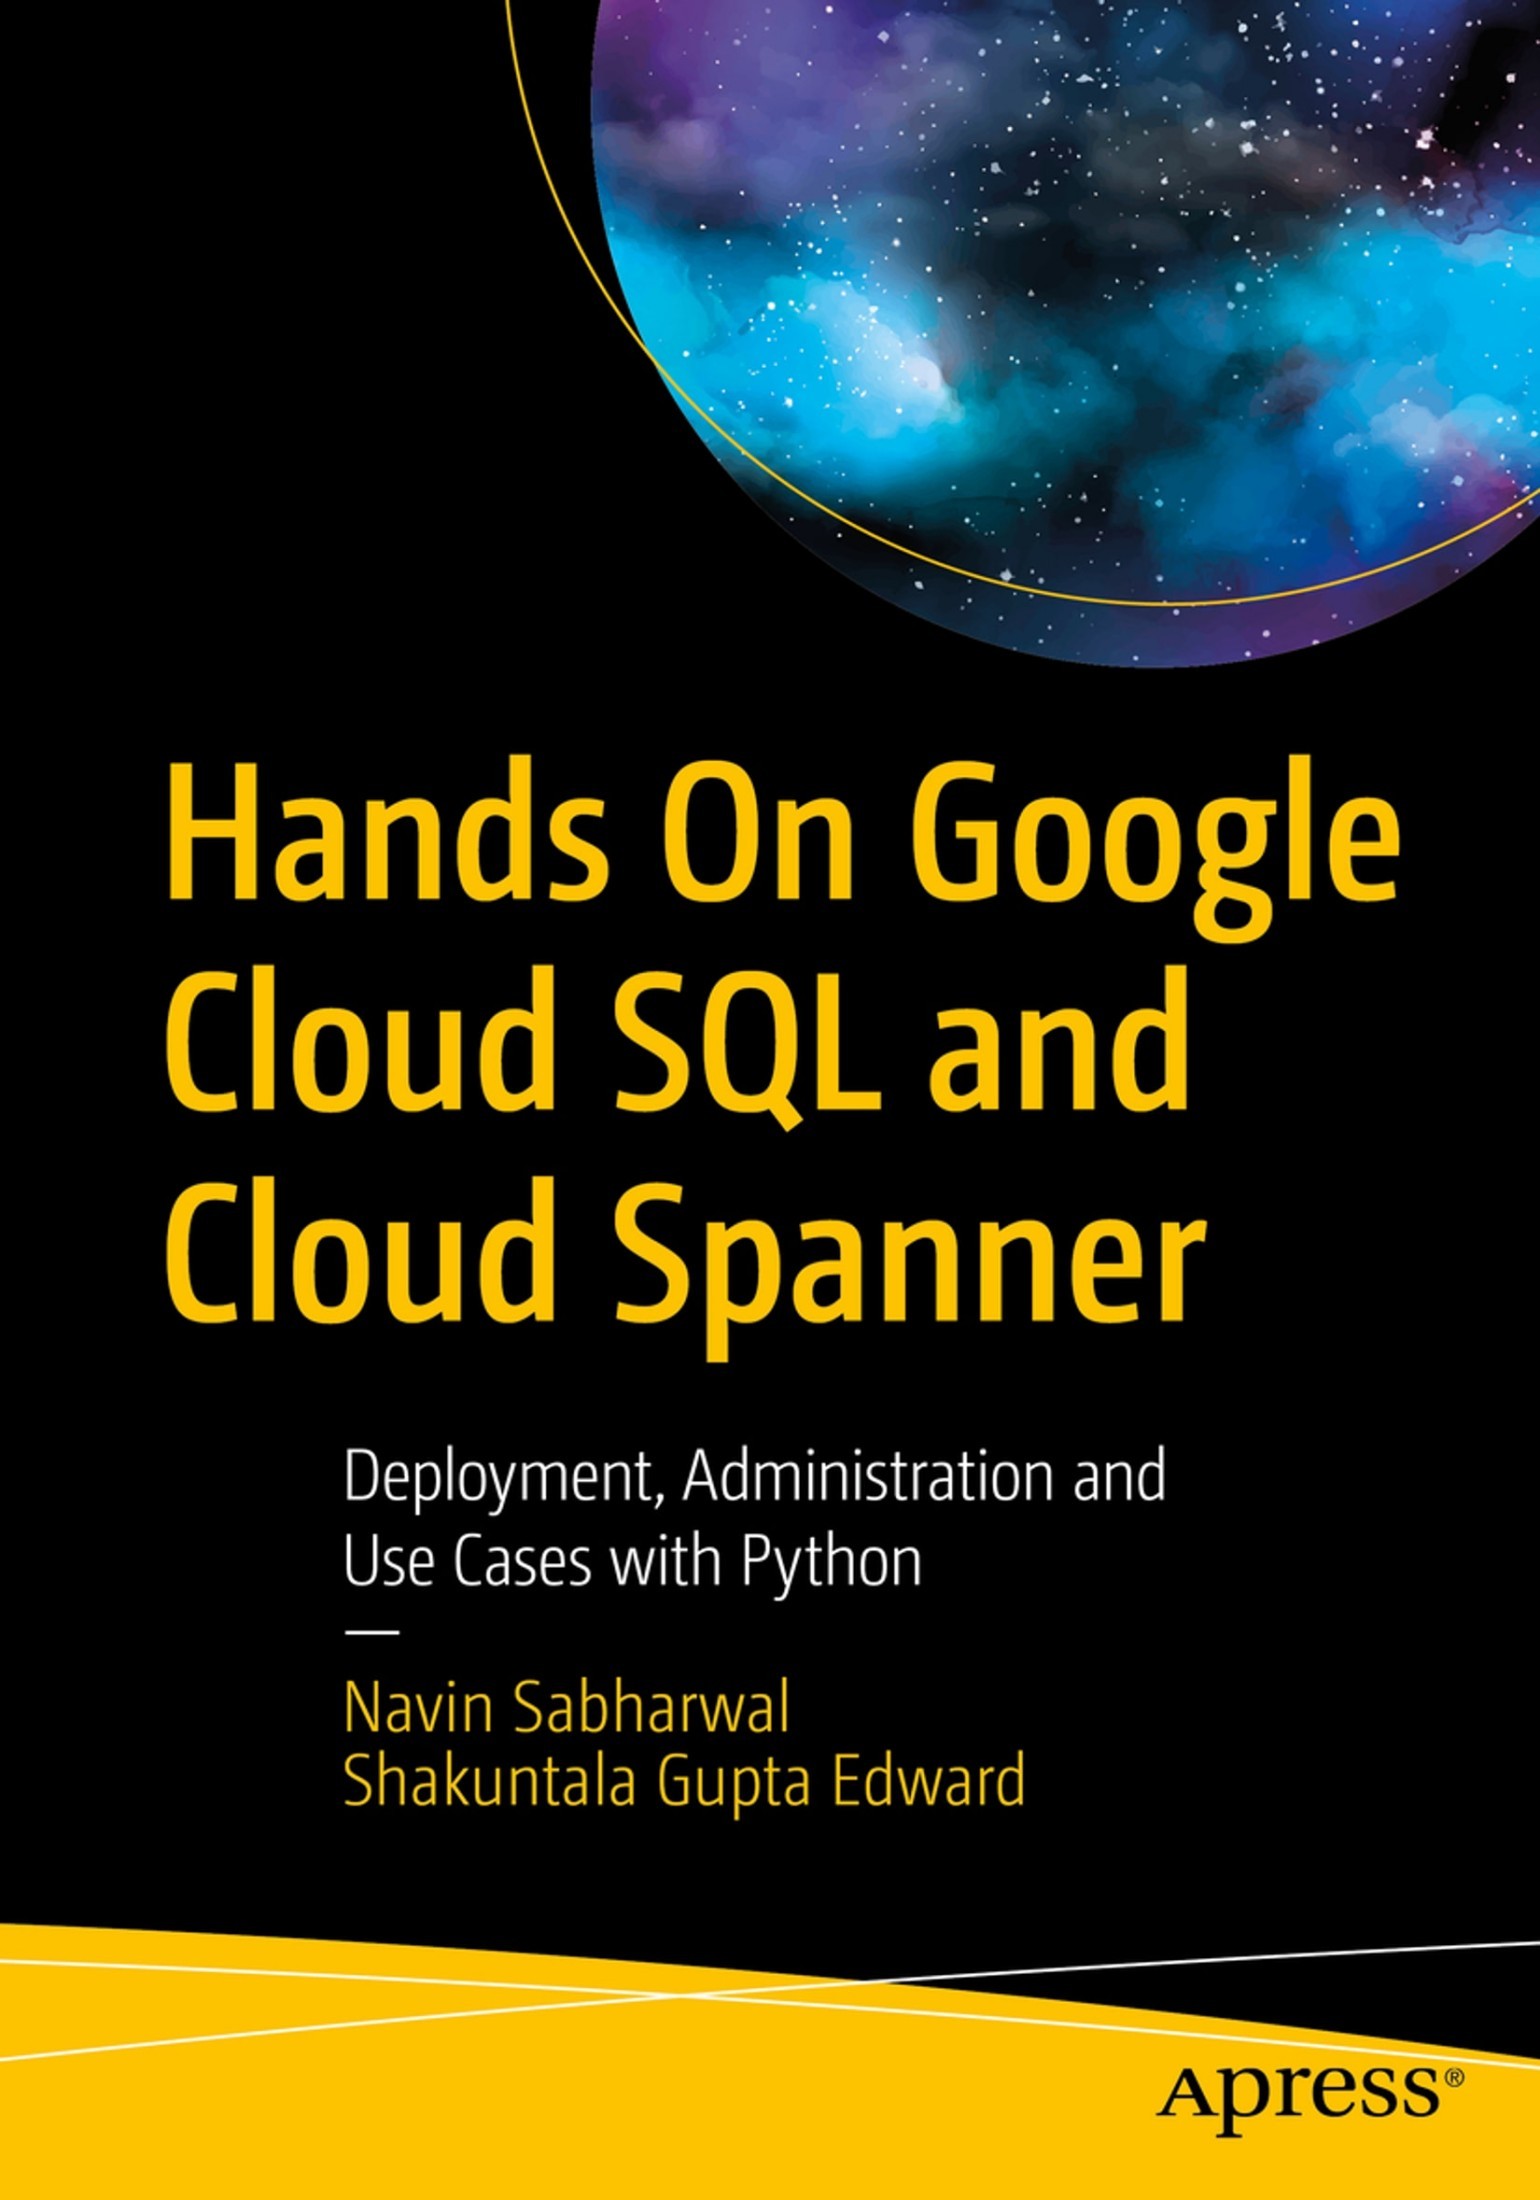 Hands on Google Cloud SQL and Cloud Spanner